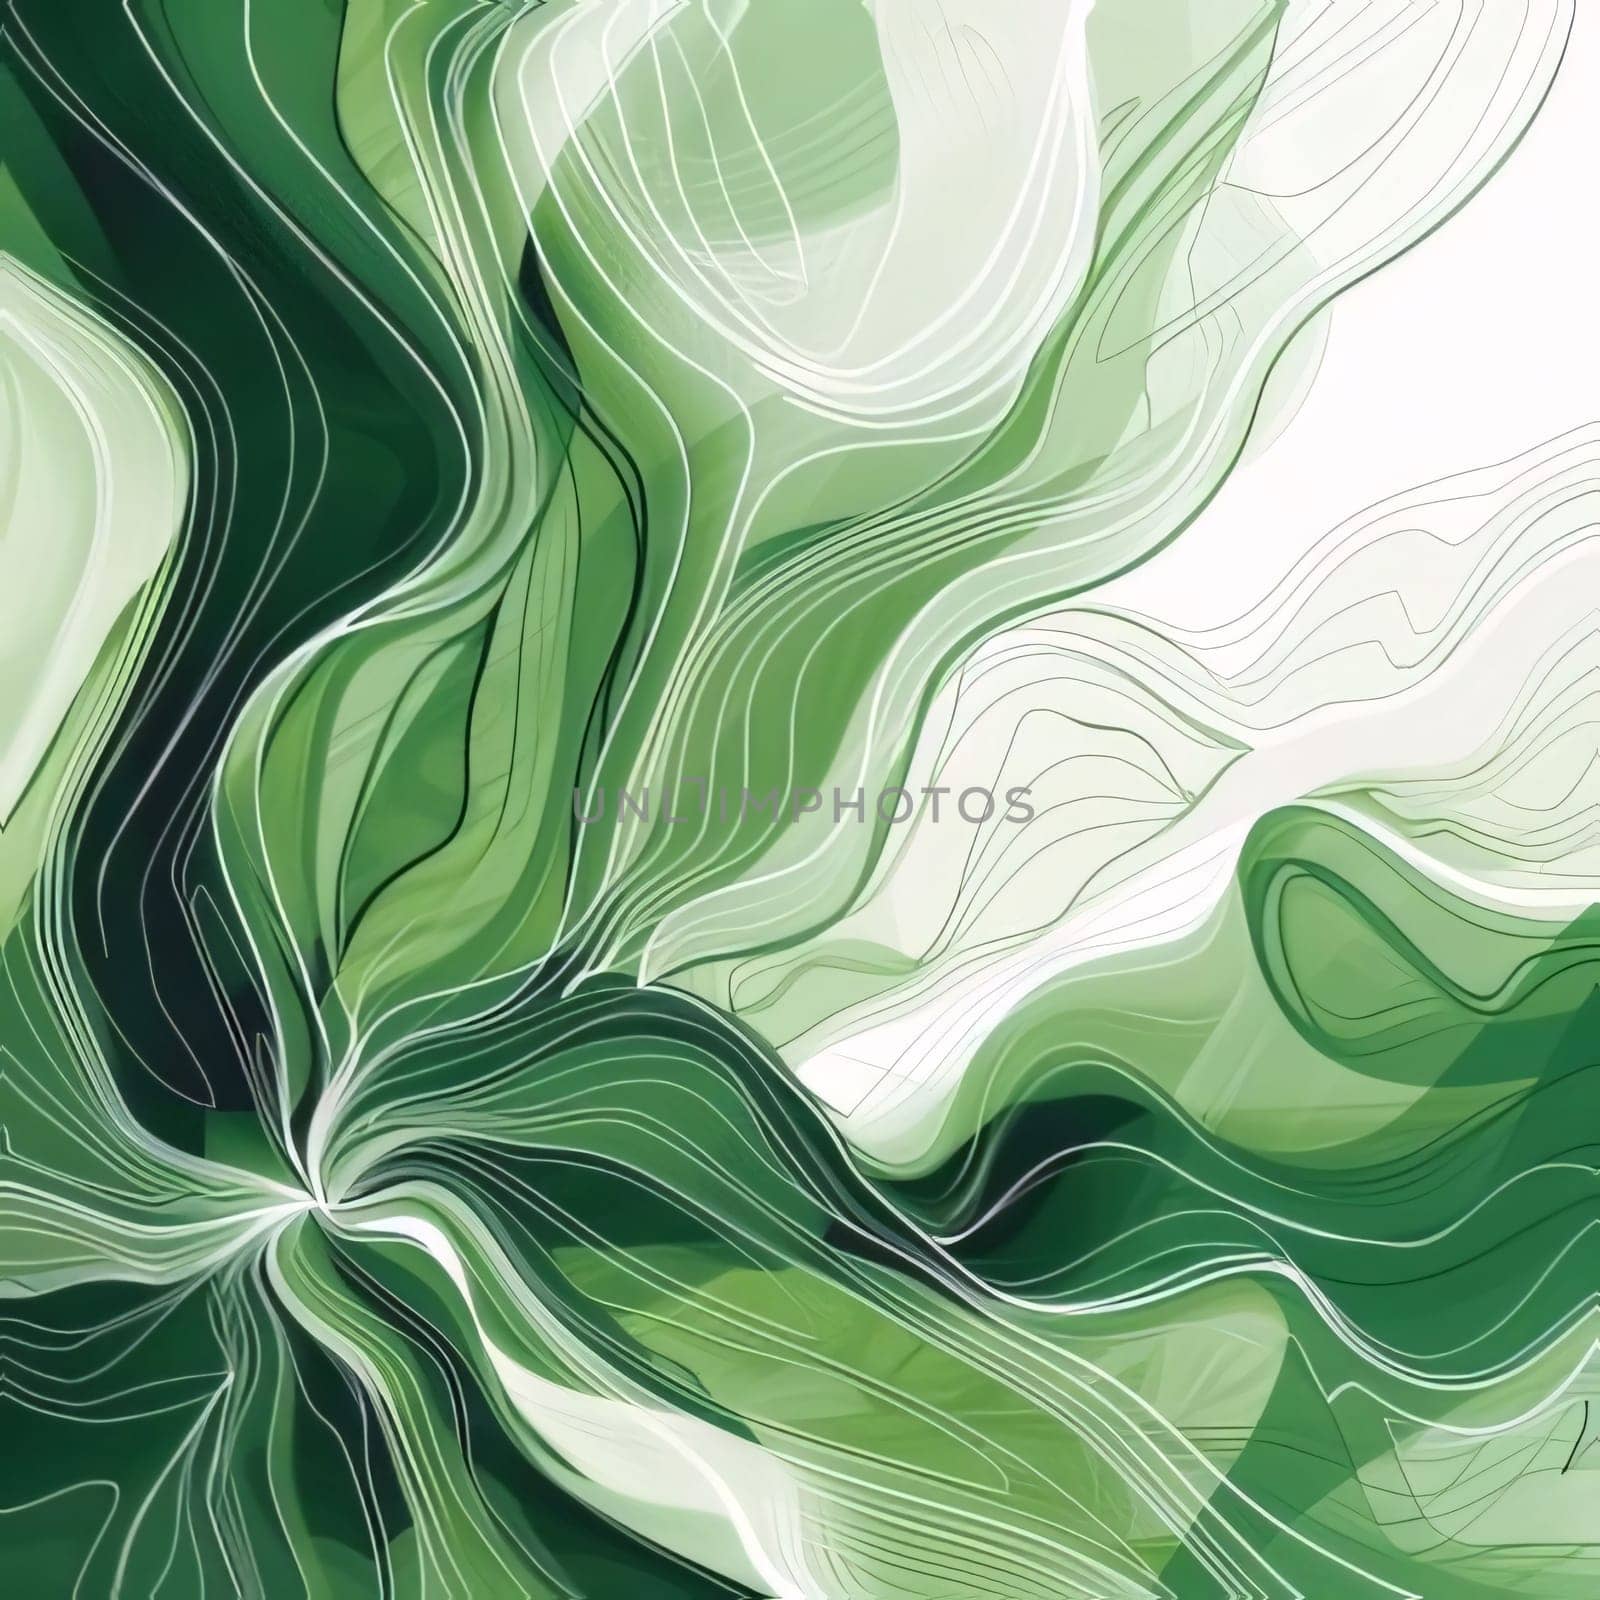 Abstract background design: Abstract green background with lines and waves. Vector illustration for your design